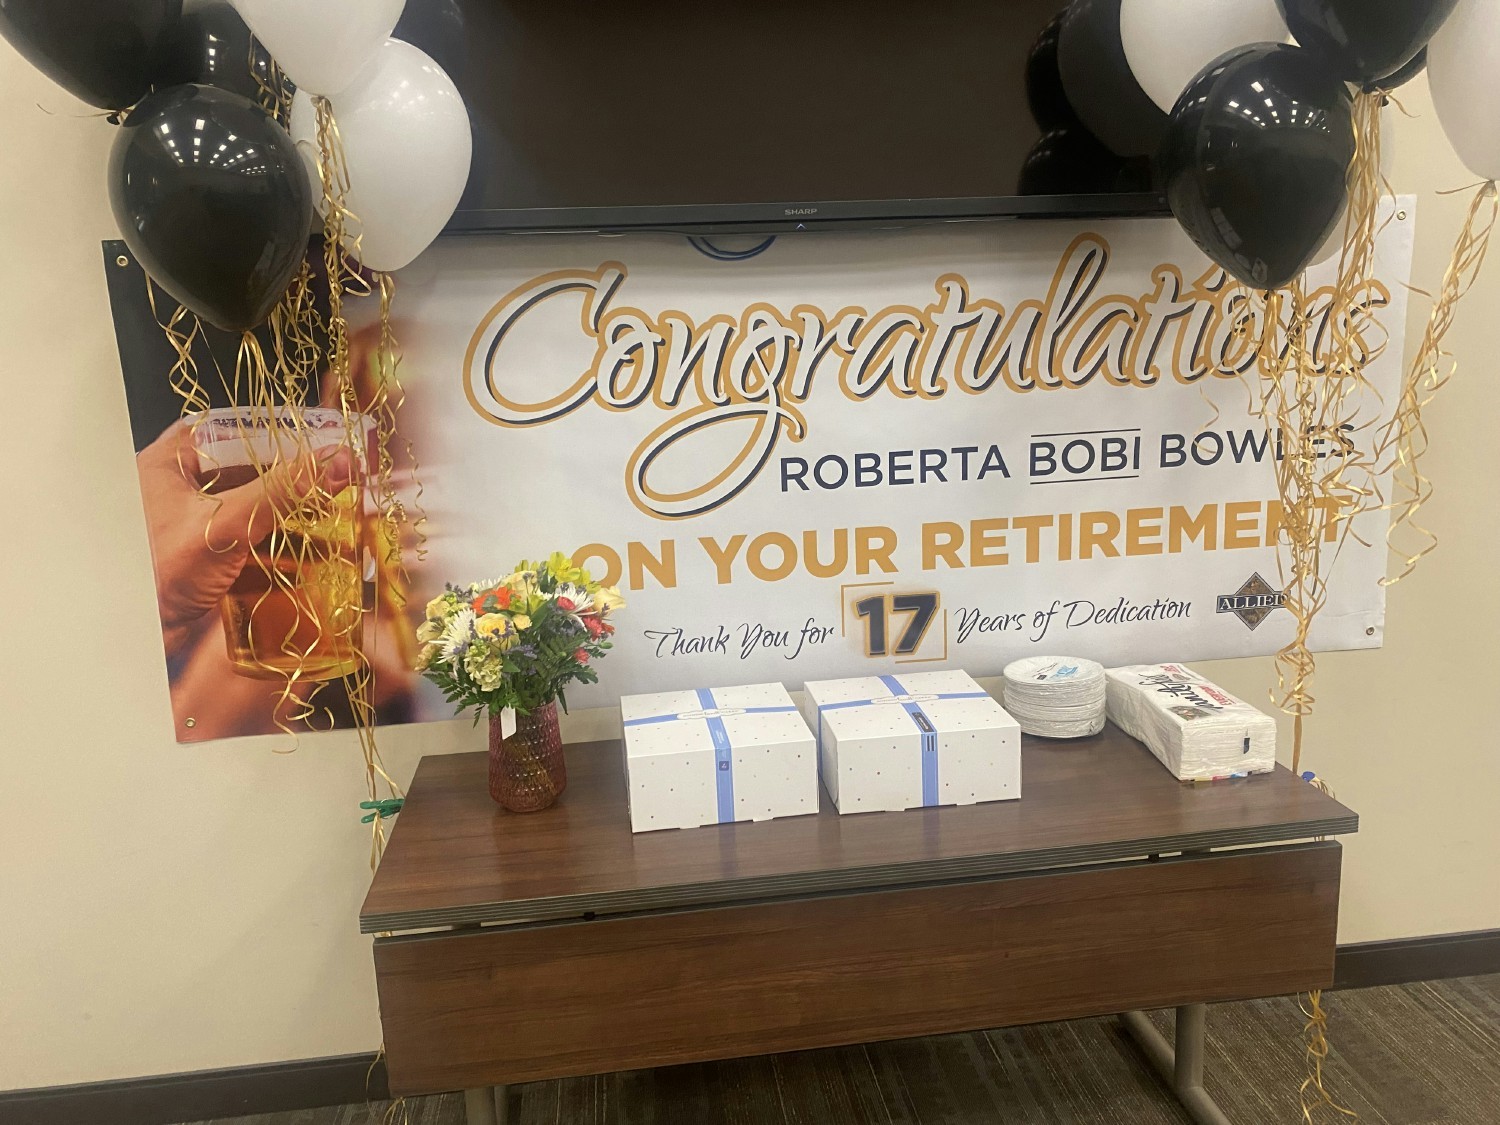 We enjoy celebrating our tenured employees when they reach milestones or retire.